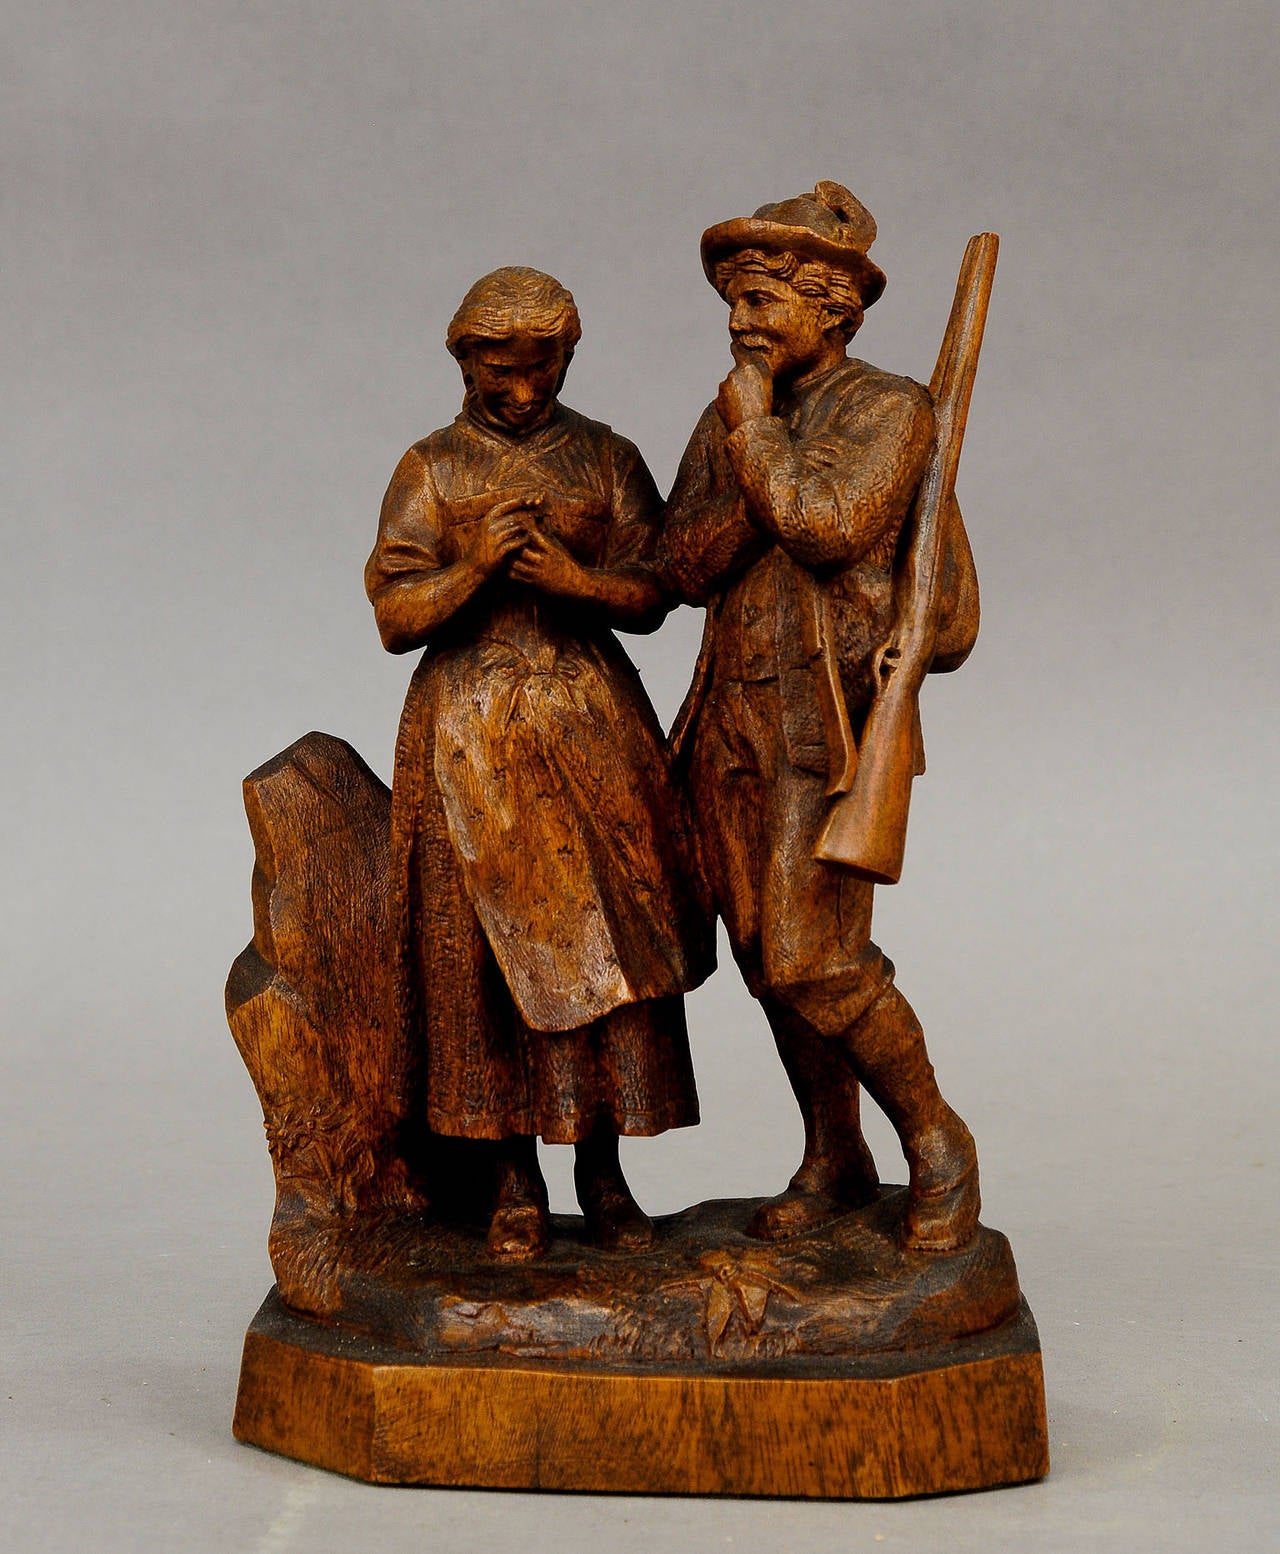 a great wooden carved statue of a hunter with his maid which got an edelweiss flower from him. a detailed and outstanding woodcarving - probably carved by johann huggler (1861-1943), swiss brienz ca. 1900.